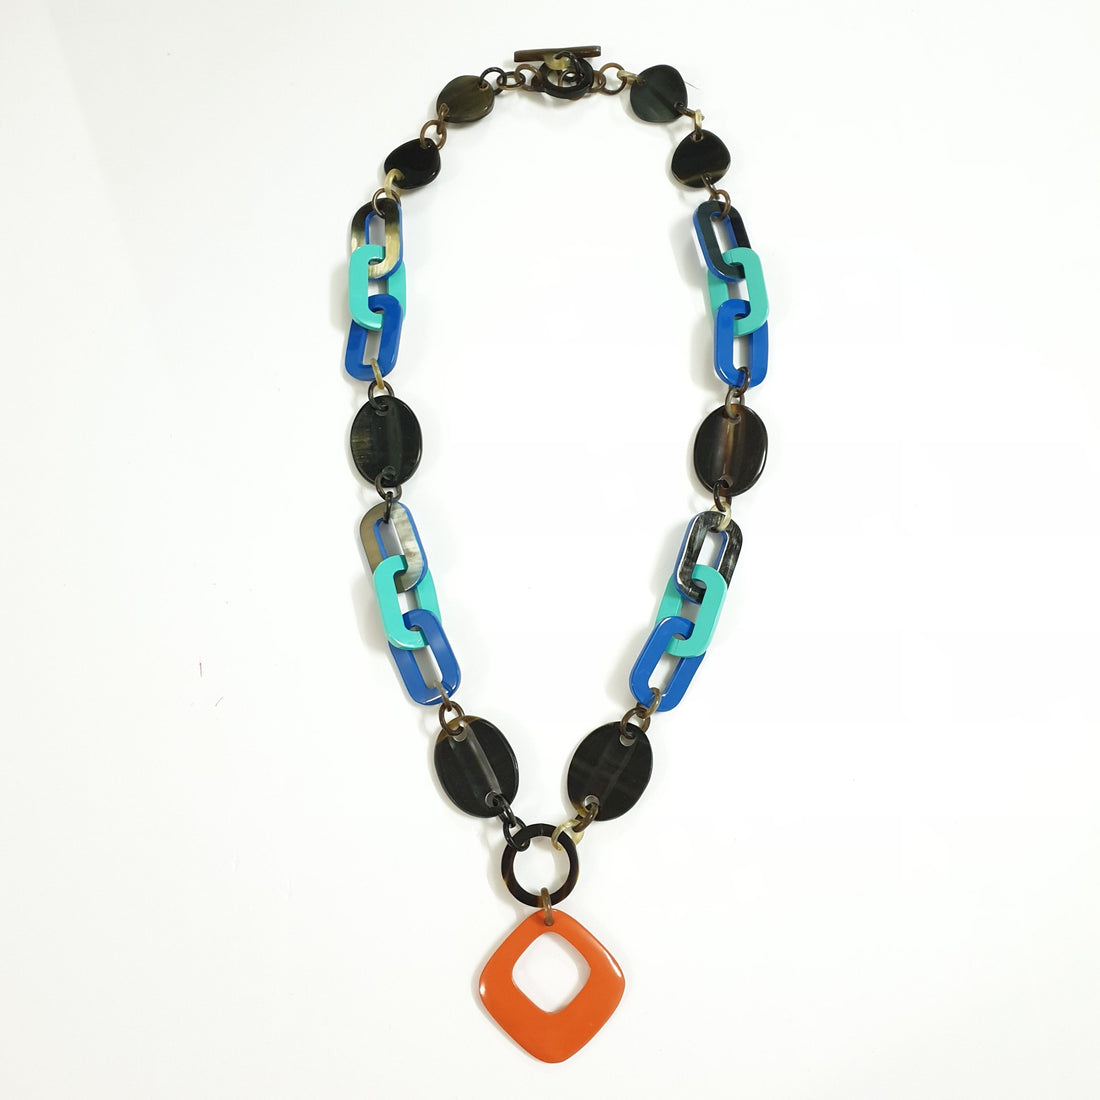 Jasmino unique handmade chain link necklace features blue and orange in natural buffalo horn for women's gifts 